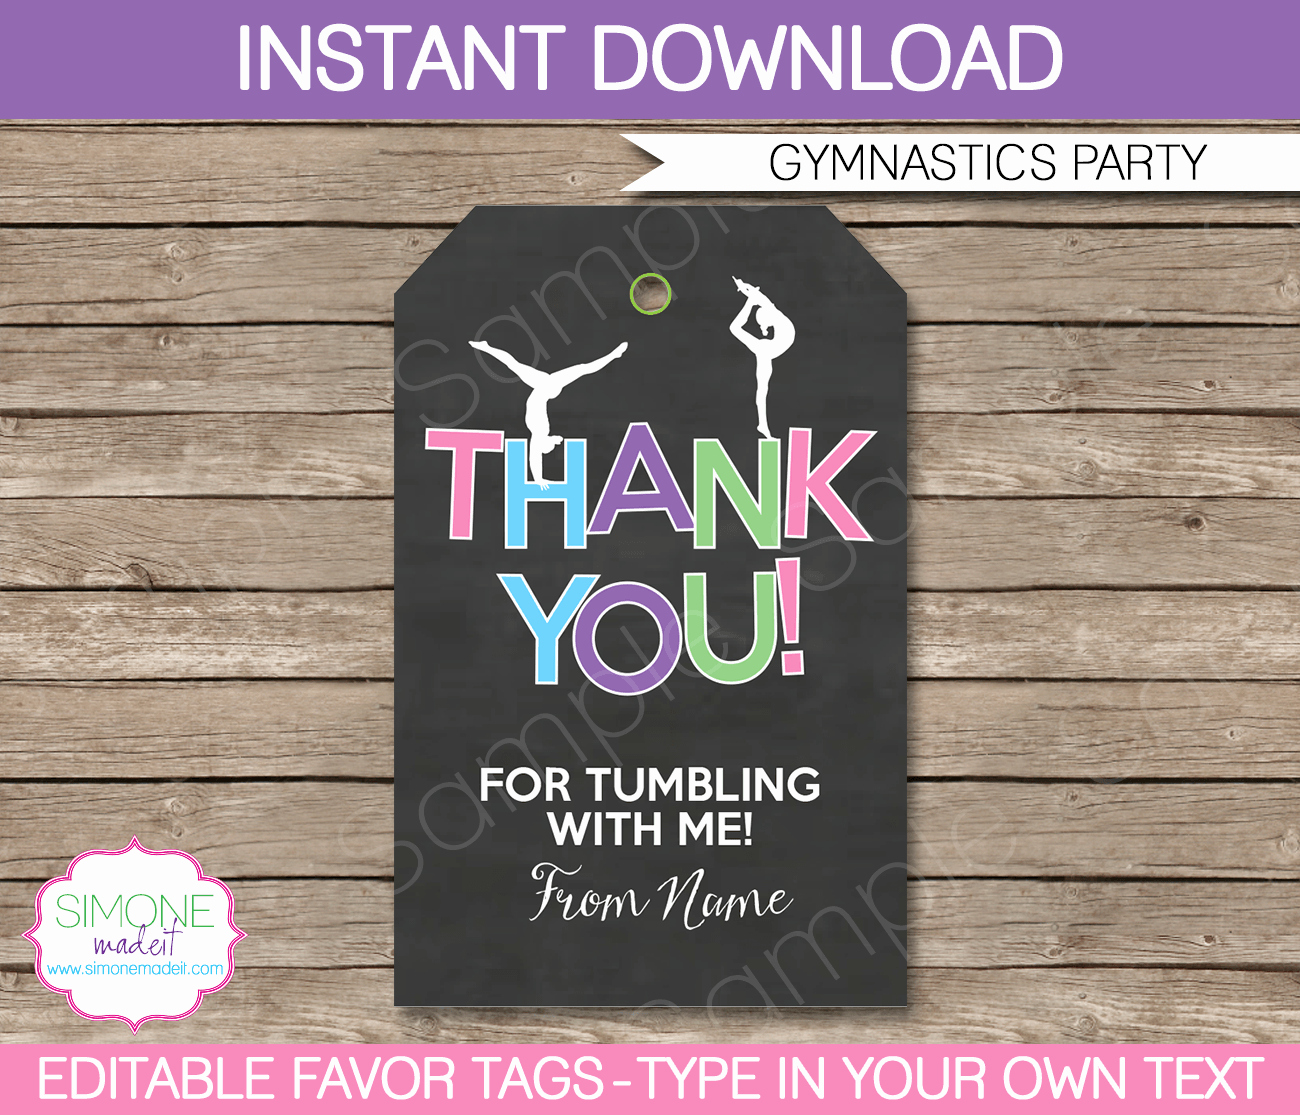 Party Favor Tags Template Awesome Gymnastics Party Favor Tags Thank You Tags